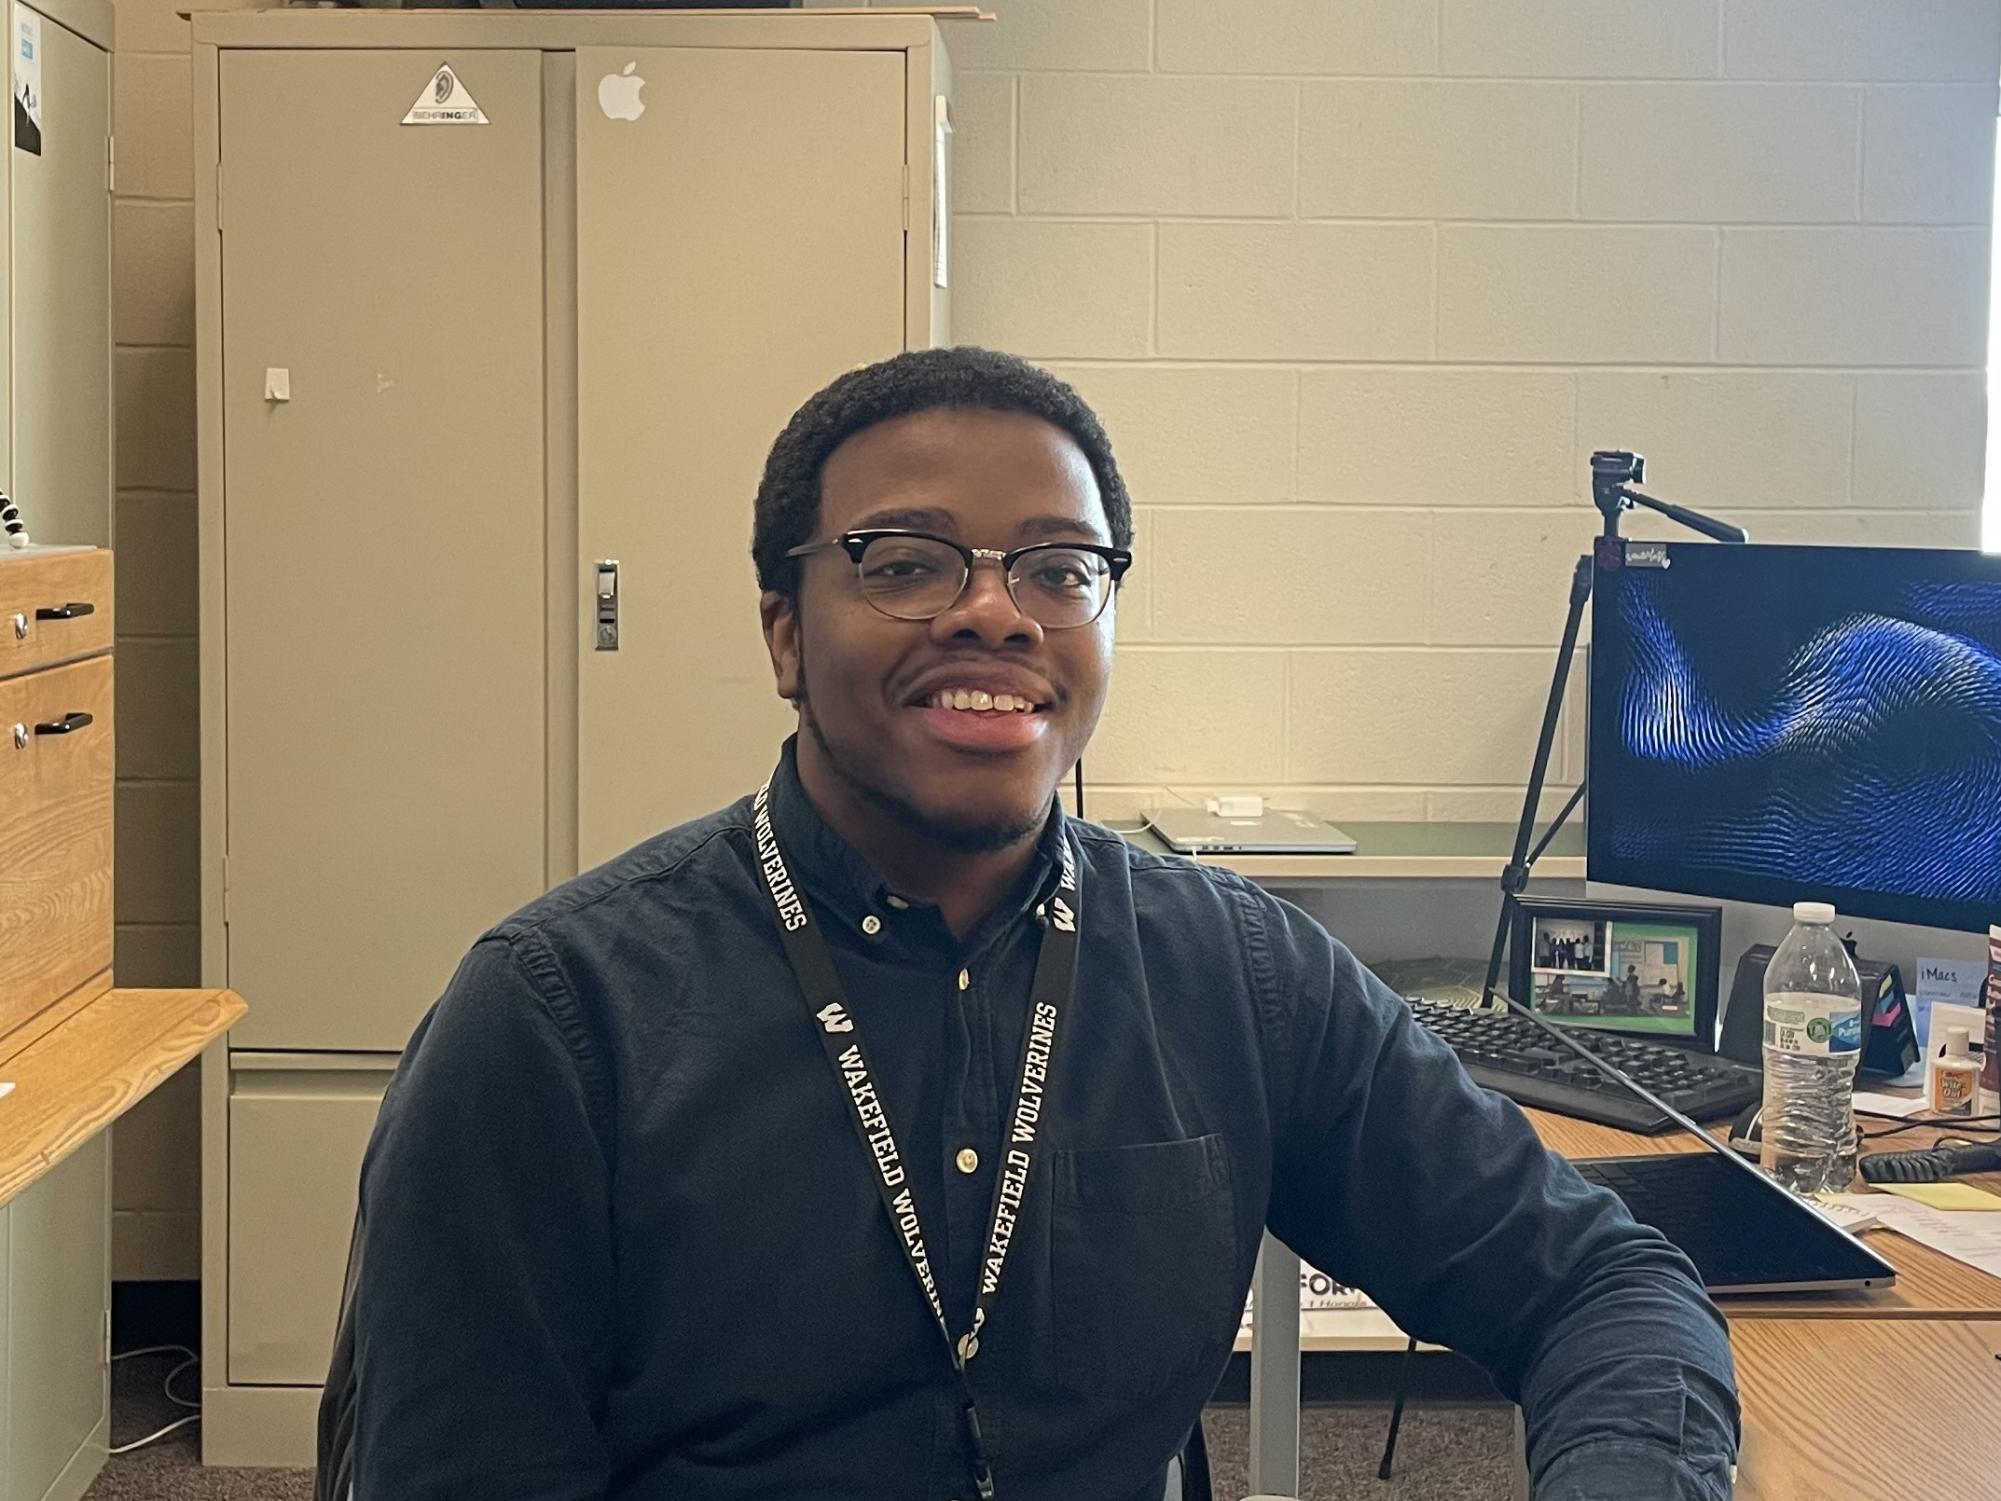 Michael Boyd is the Adobe visual and video design teacher here at Wakefield. He is excited to teach students the wonders of digital design.